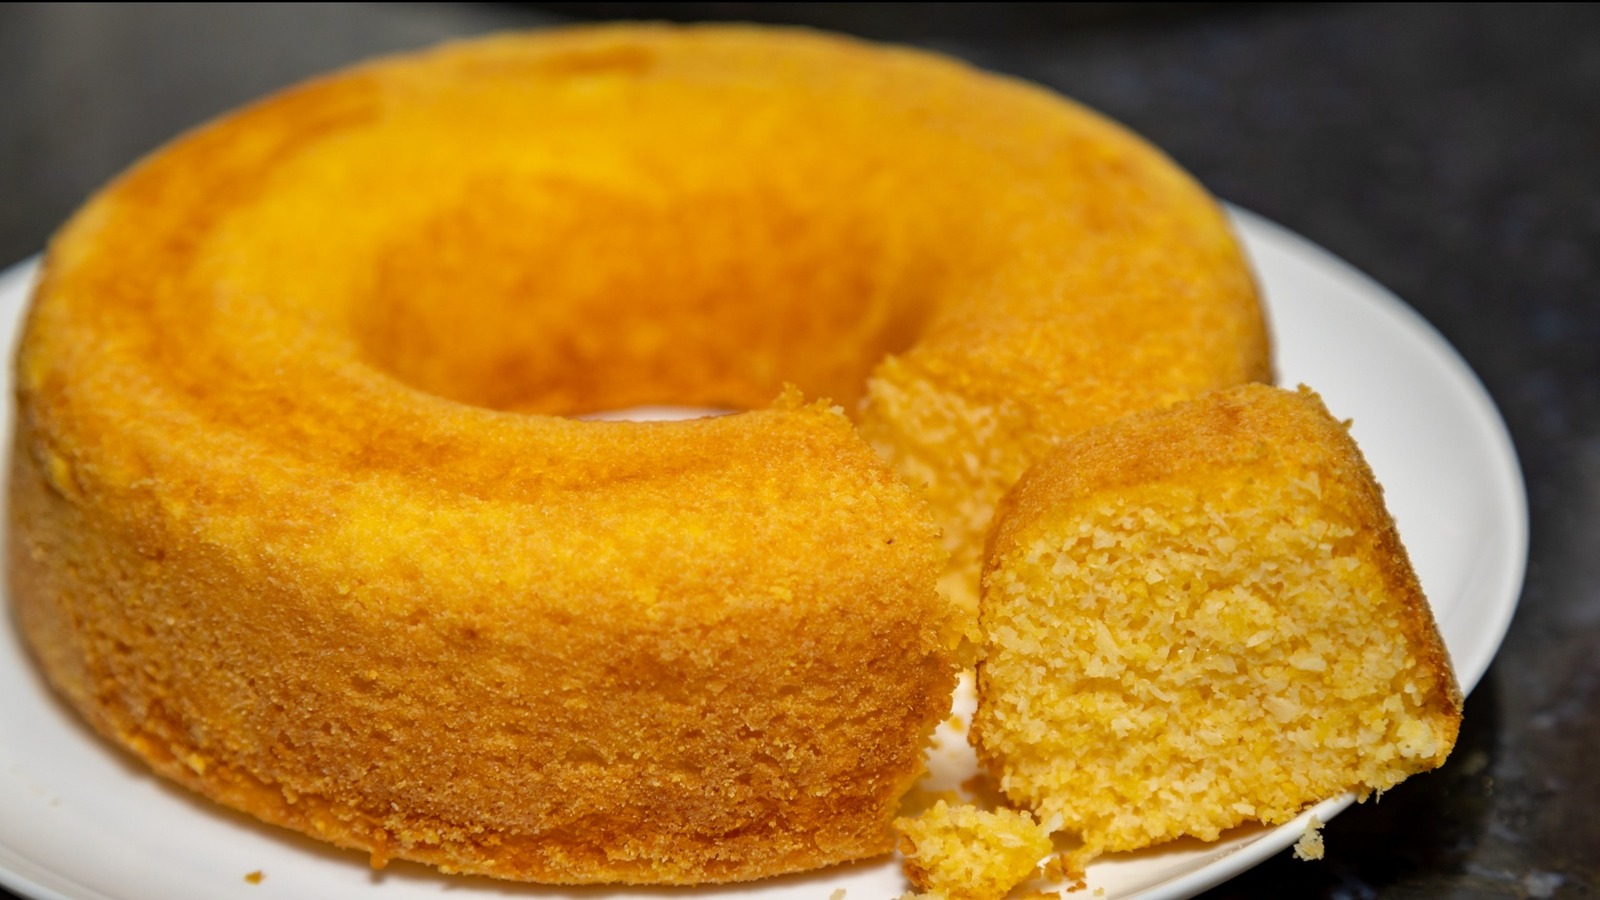 What's the Difference Between Bundt Pans, Sponge Cake Pans, and